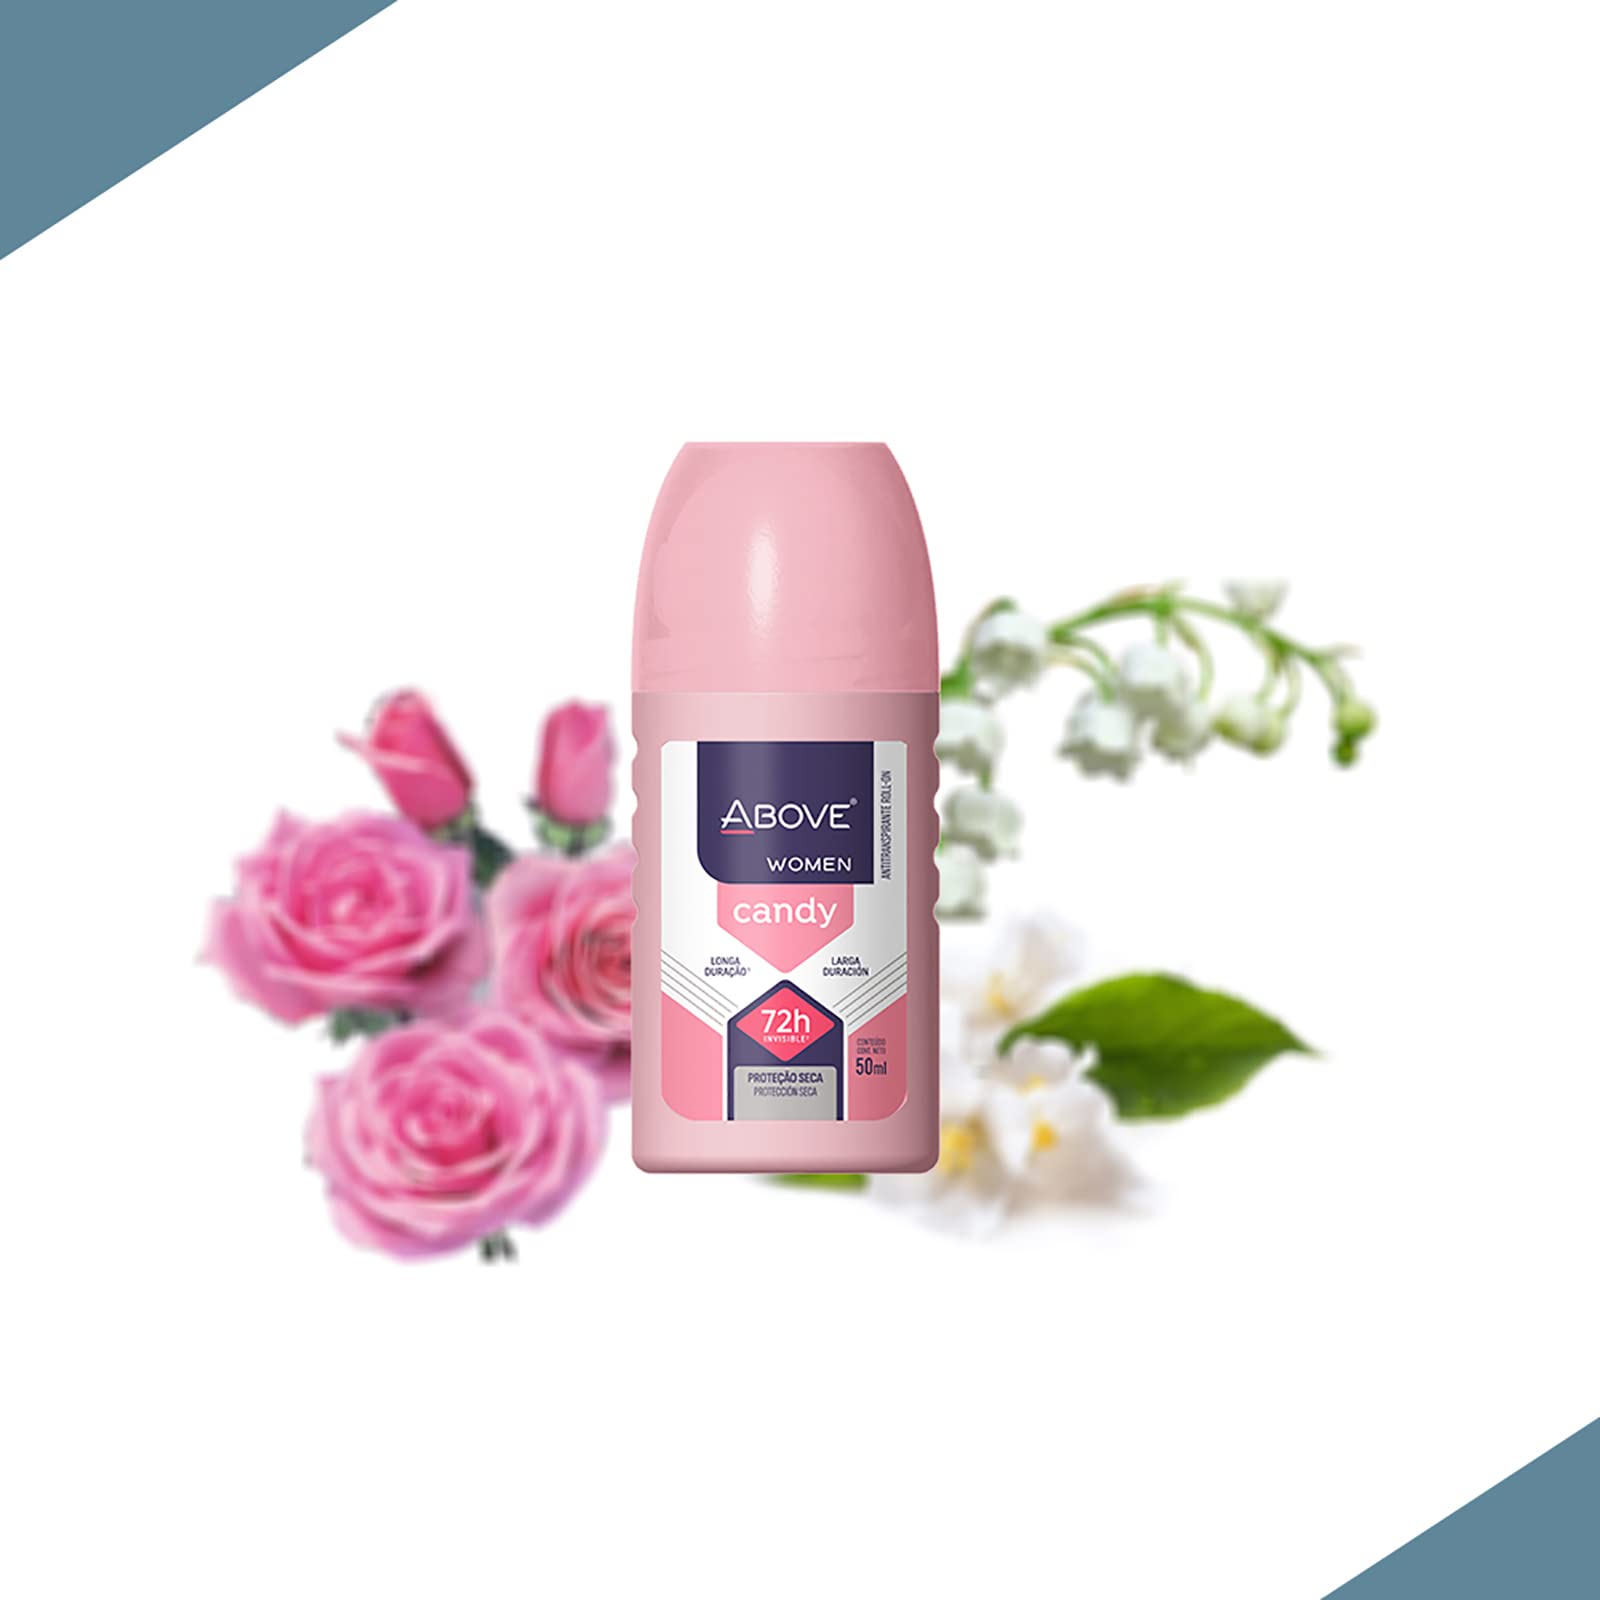 ABOVE Candy- 72 Hour Classic Antiperspirant Roll-On Deodorant for Women - Sensual Floral Fragrance - Protects Against Sweat and Body Odor - Lime and Apricot Notes - Alcohol Free - 1.7 oz